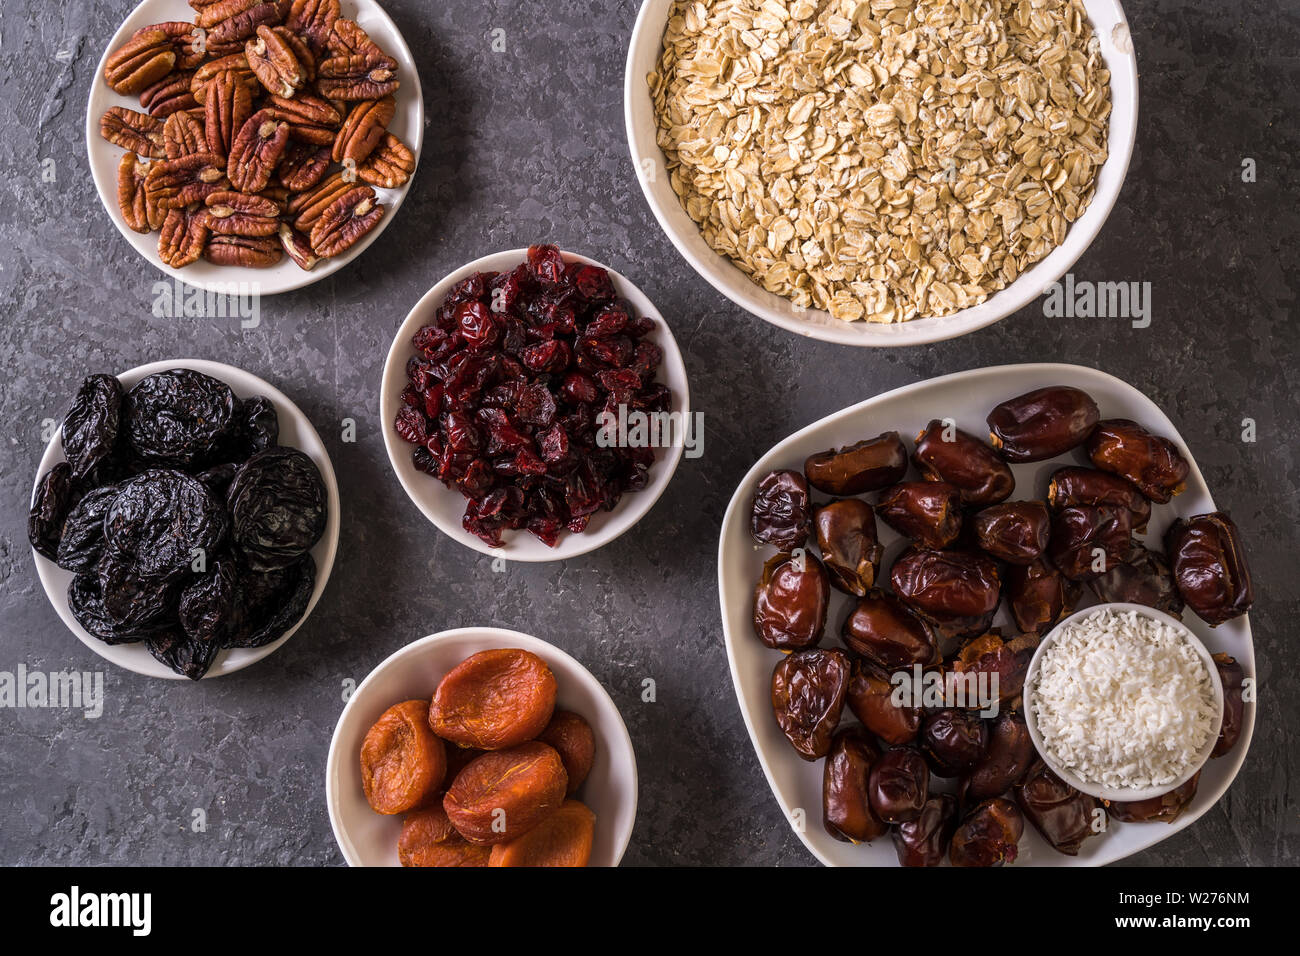 Ingredients for preparing Healthy organic energy balls- dates, dried apricot, oat flakes, raisin, dried cranberries, pecan nuts, coconut shavings on g Stock Photo